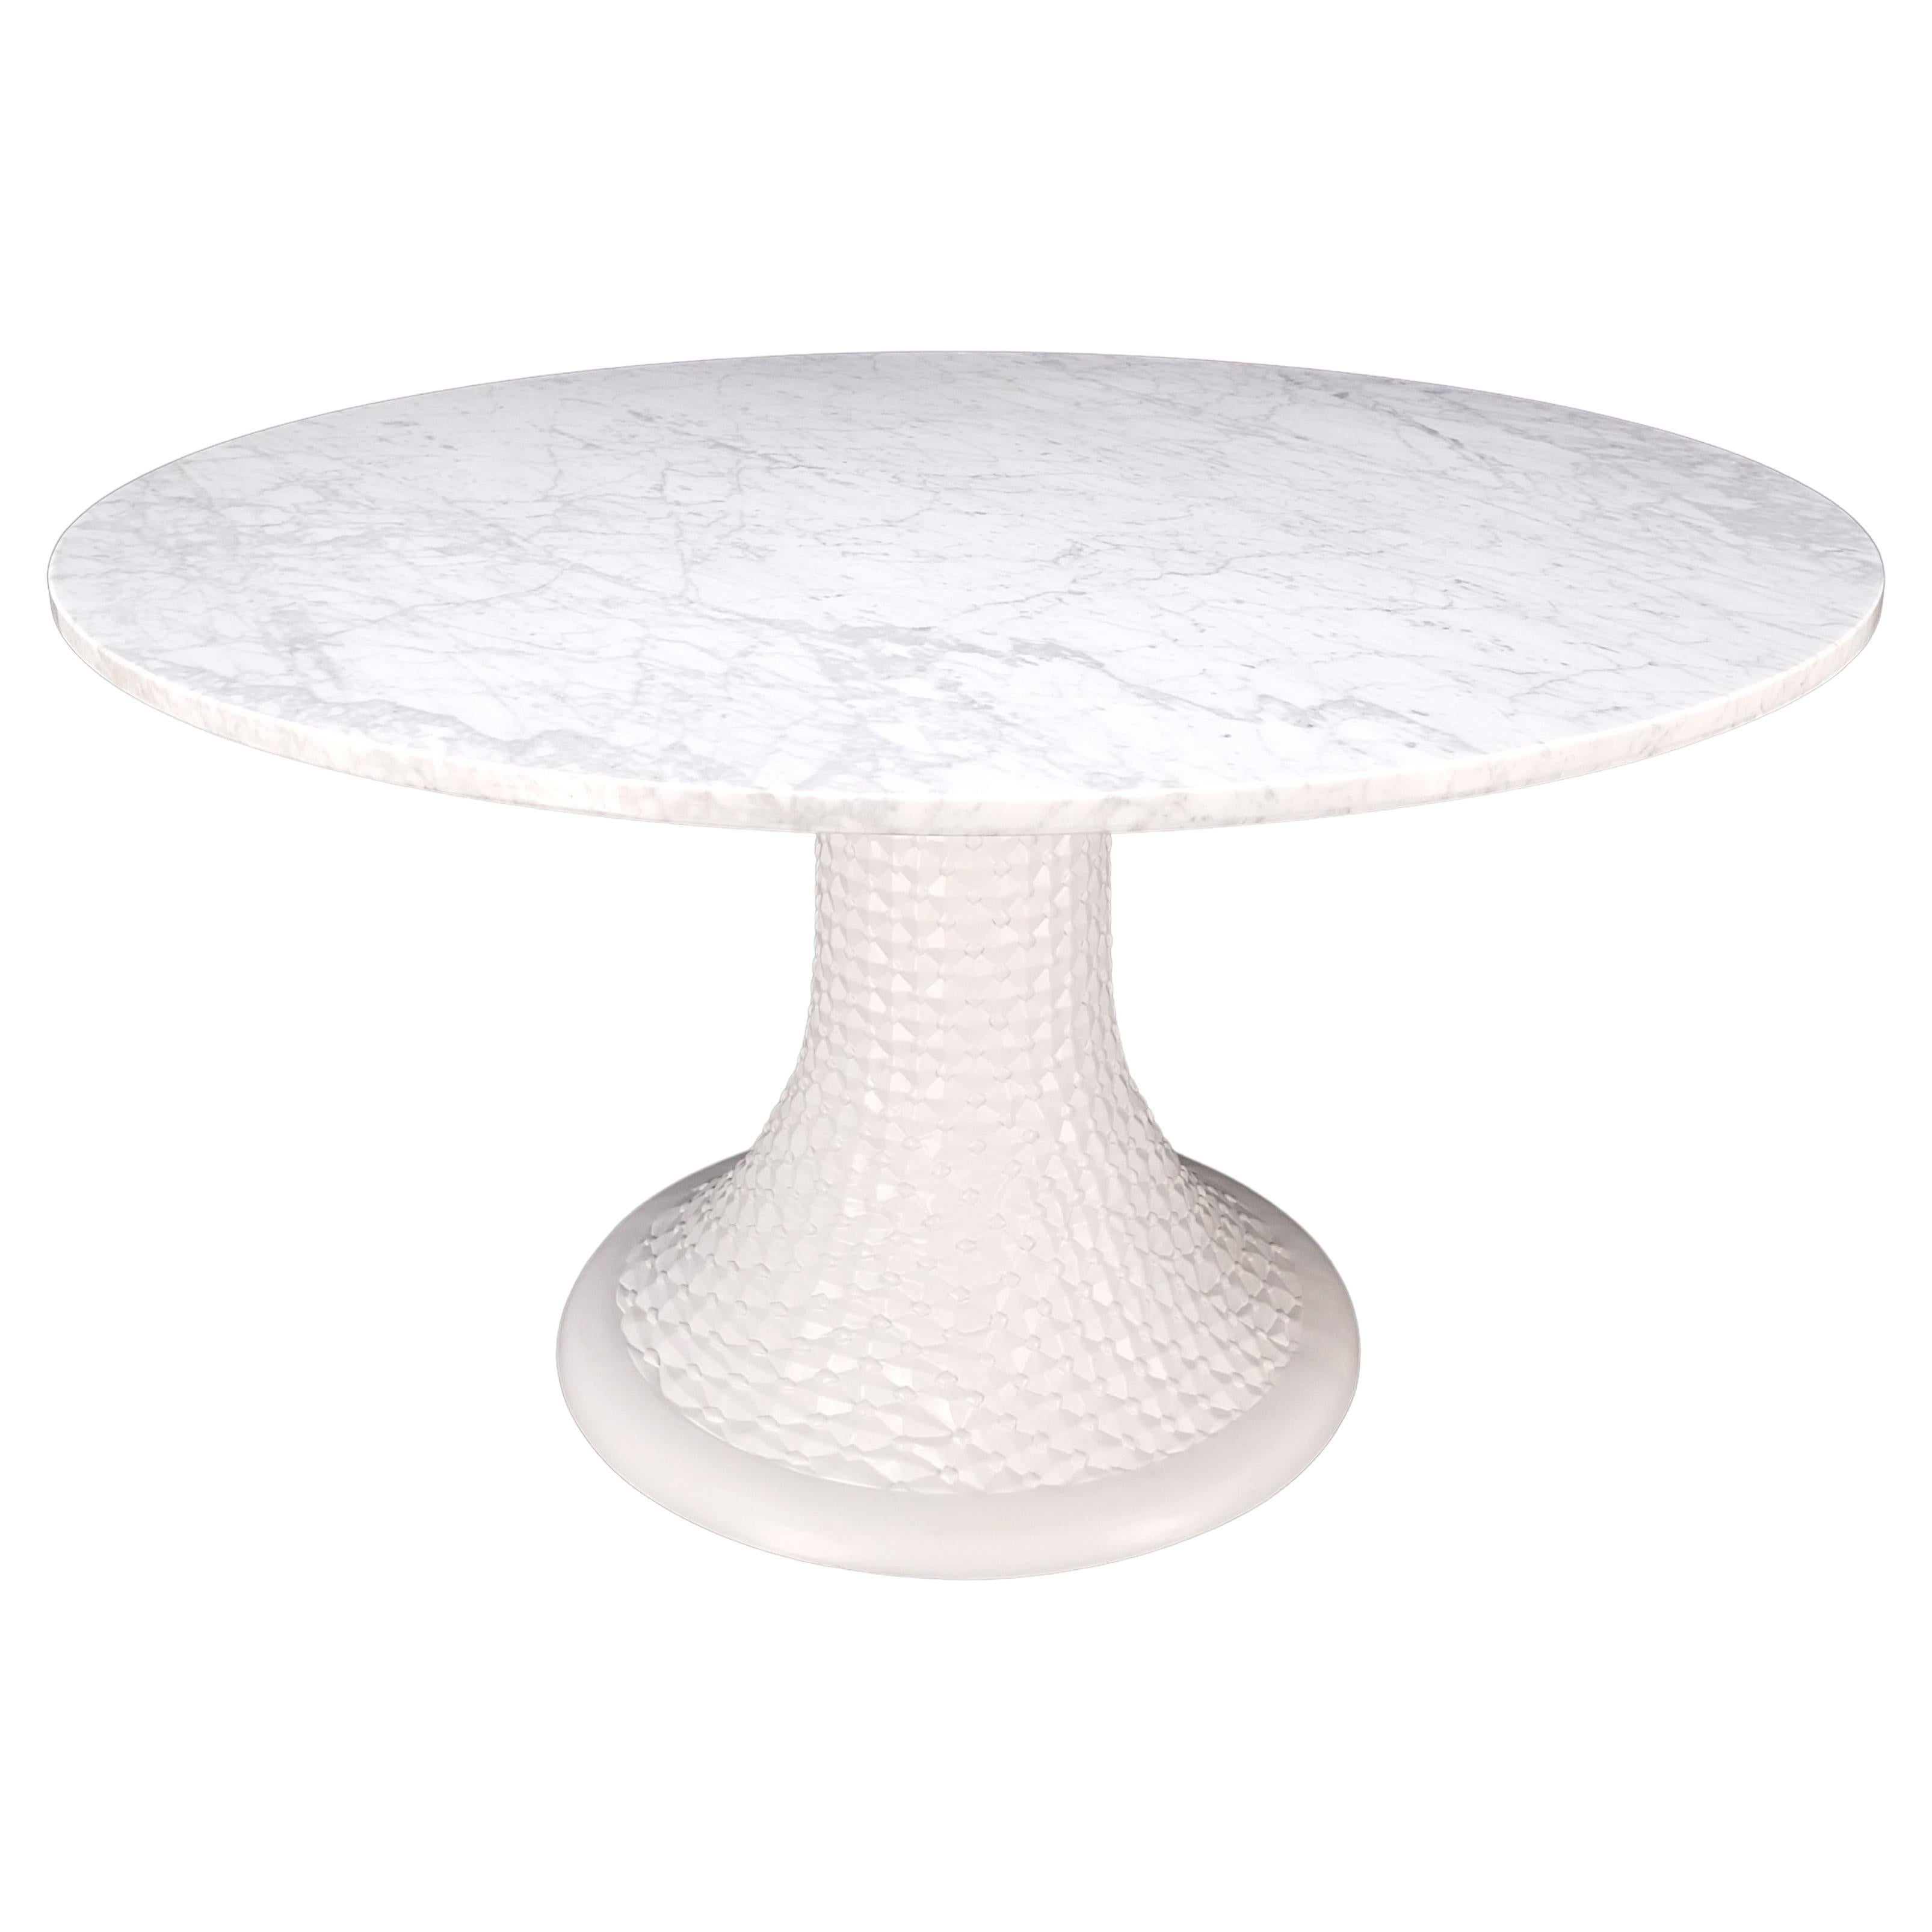 Round White Marble 1" Thick Top Diamond Pattern Texture Composition Tulip Shape  For Sale